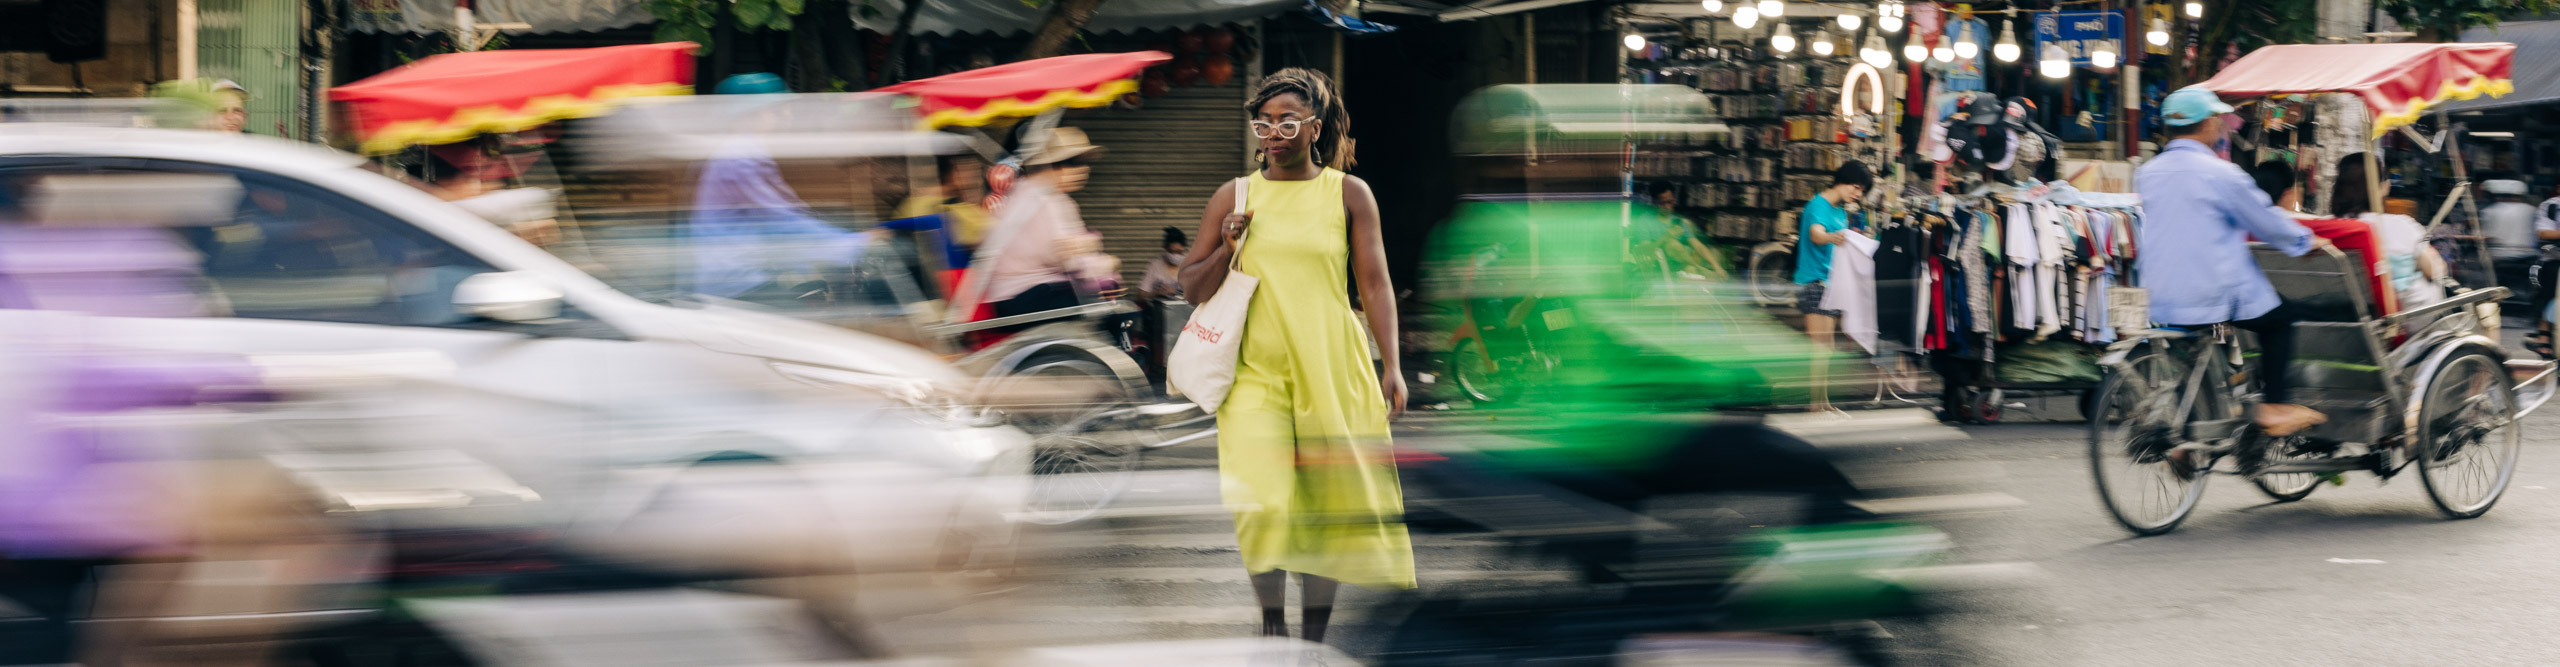 Woman in yellow dress standing in busy street with mopeds driving past, Hanoi, Vietnam